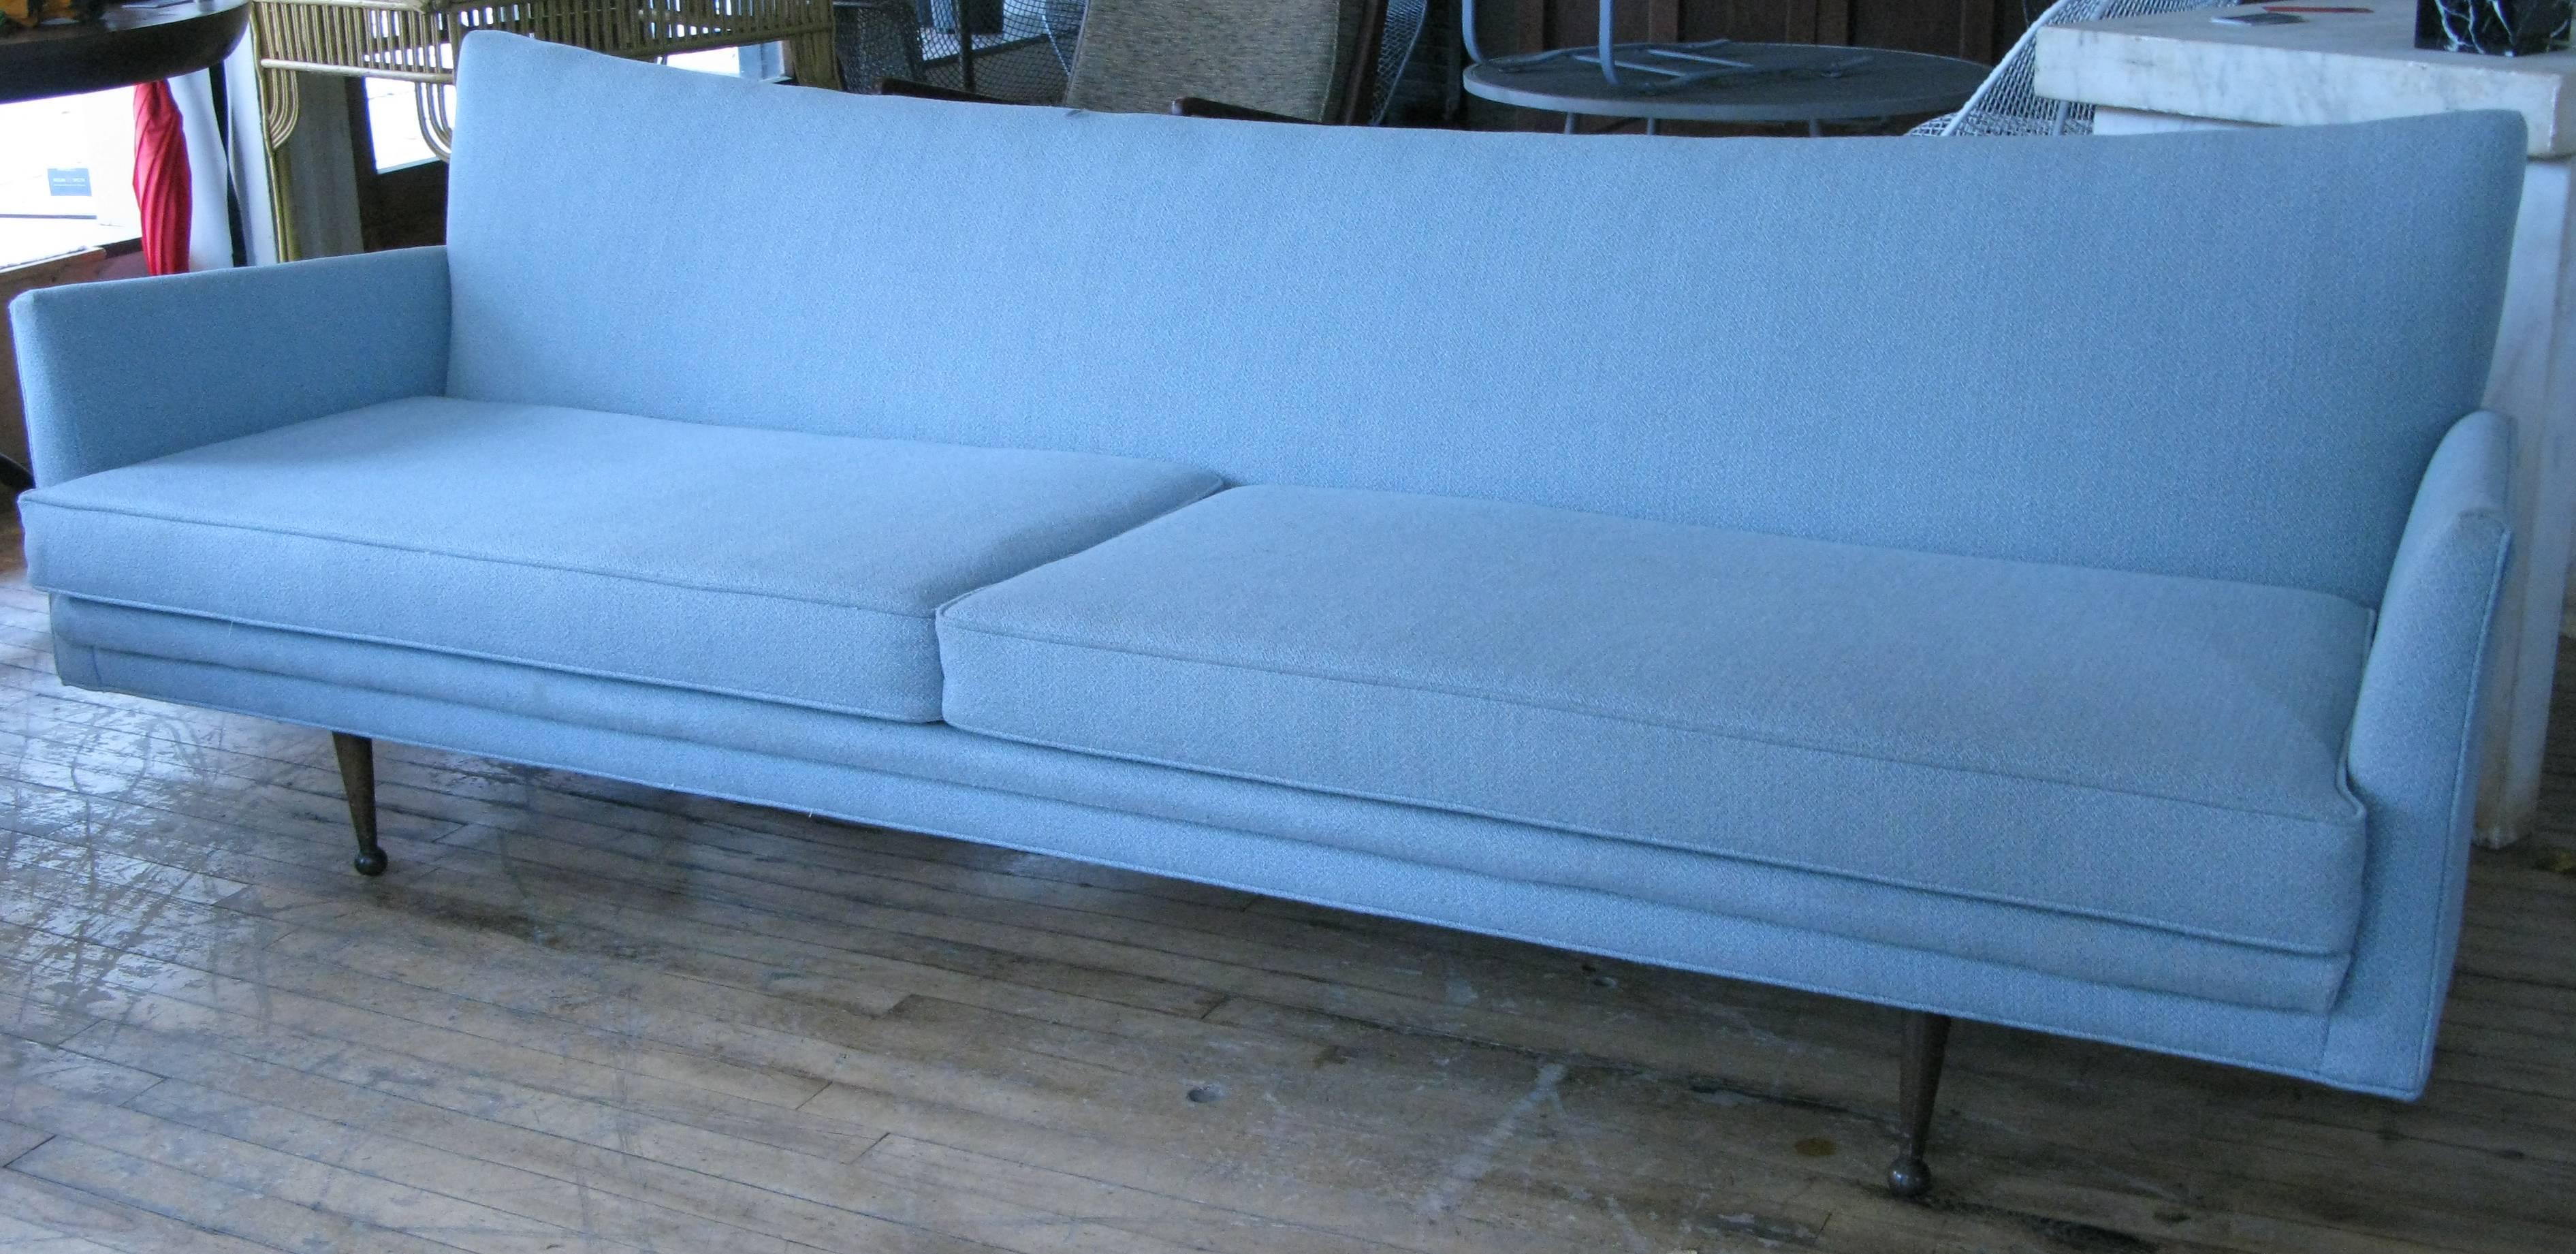 A very handsome 1950s modern sofa, with slightly raised tips on the wingback, and raised on tapered walnut legs. In original powder blue upholstery.